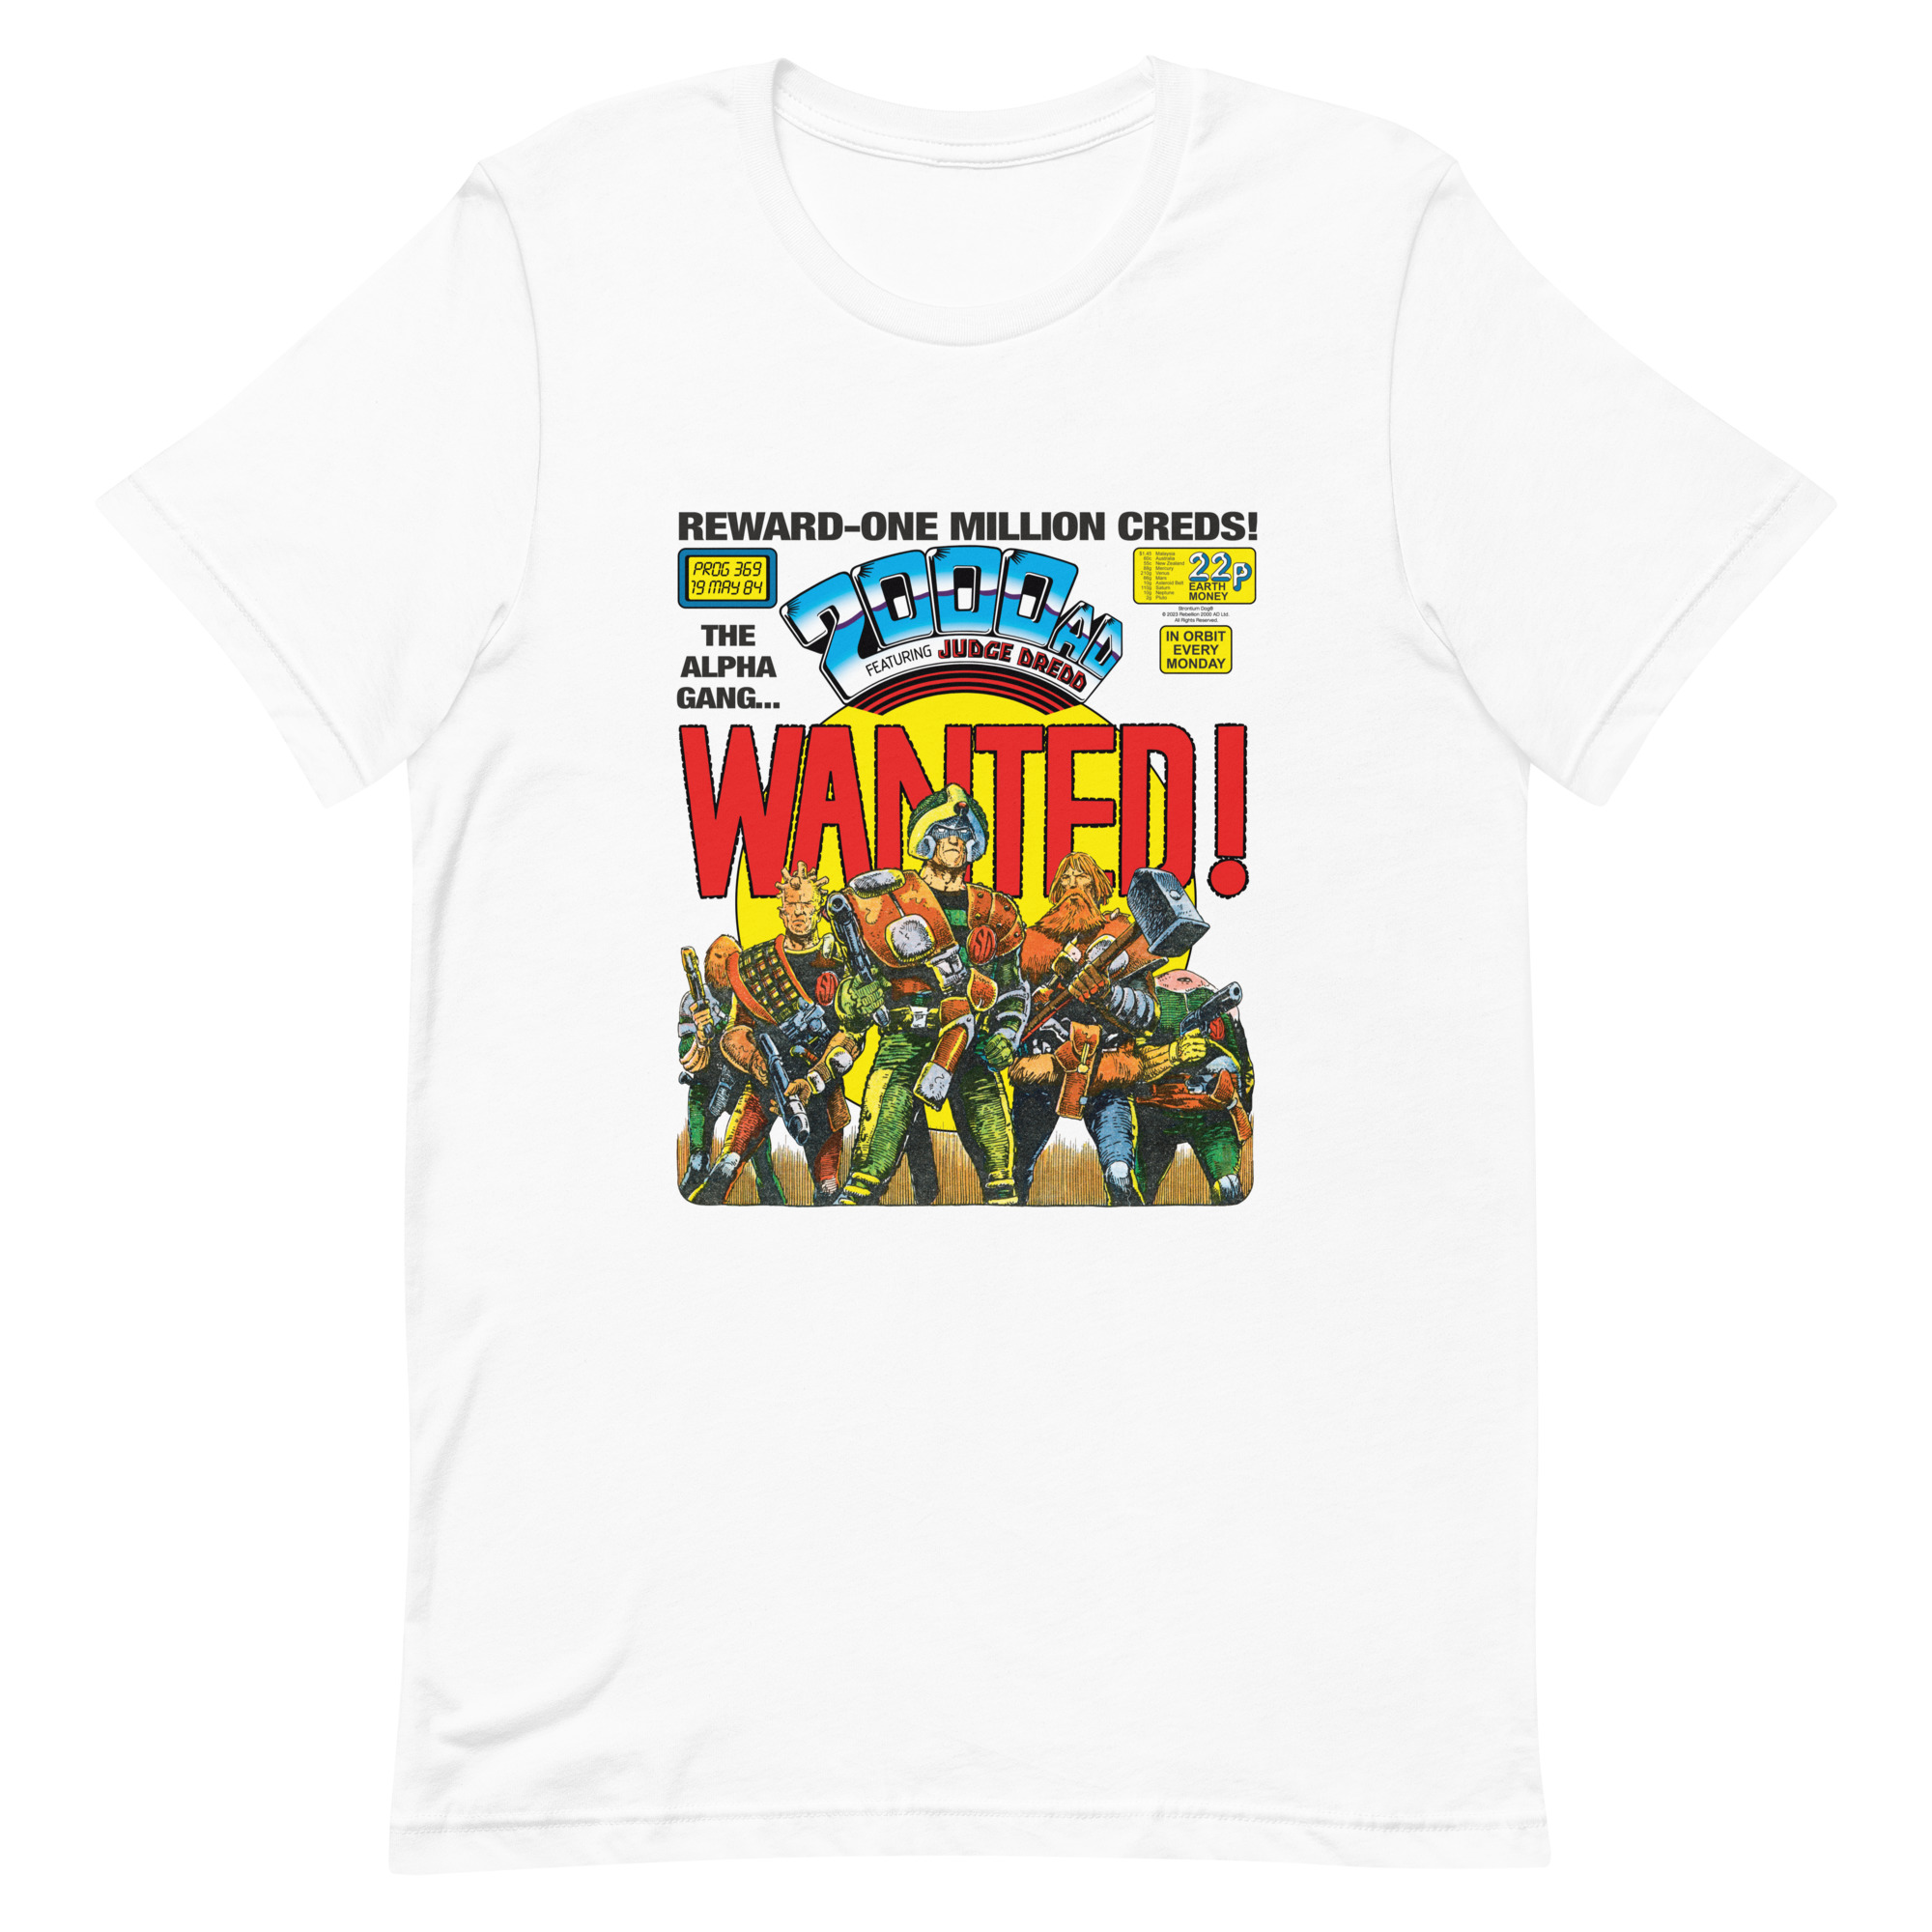 White Tshirt with a 'Classic' 2000 AD Cover image on the chest. In the image Strontium Dog and his team, the Alpha gang, stand ready.